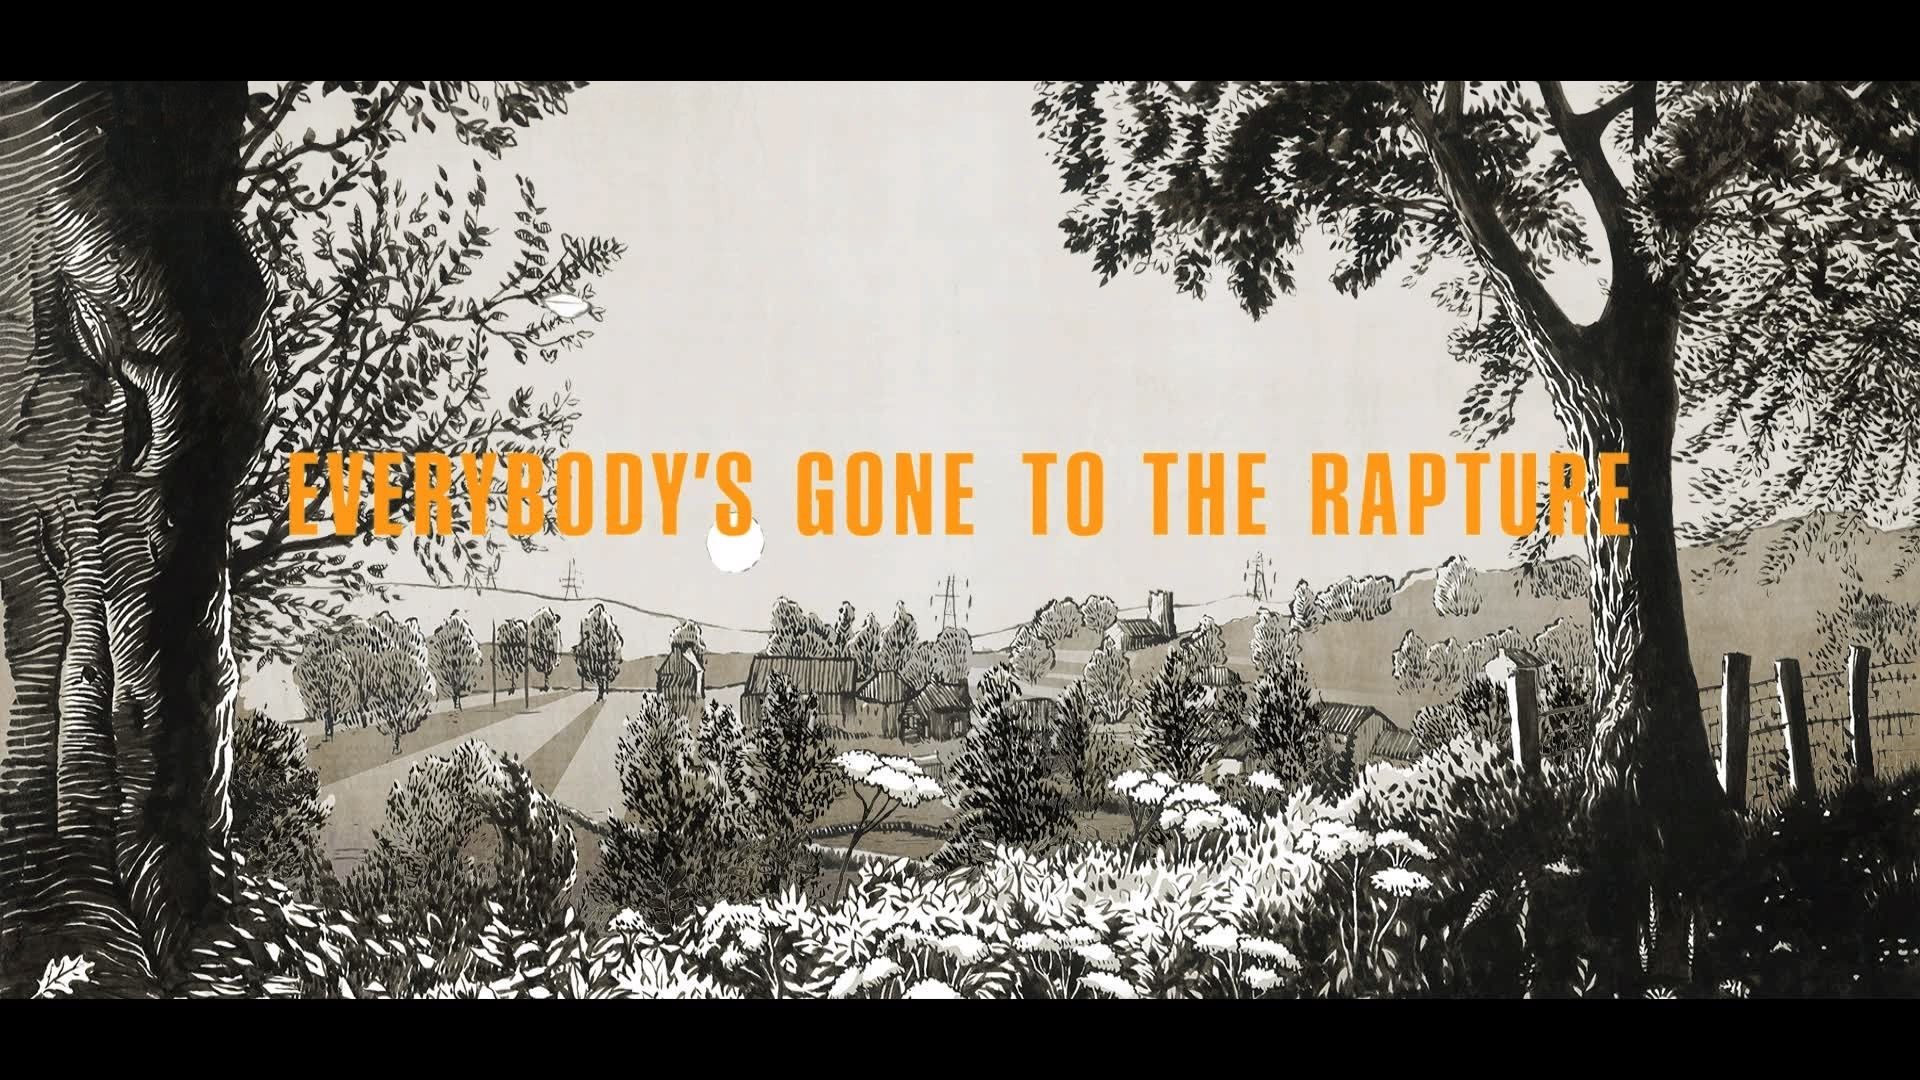 Everybody was to the world. Everybody's gone to the Rapture игра. Хроники последних дней. Хроники последних дней БАУ. Хроники последних дней игра.